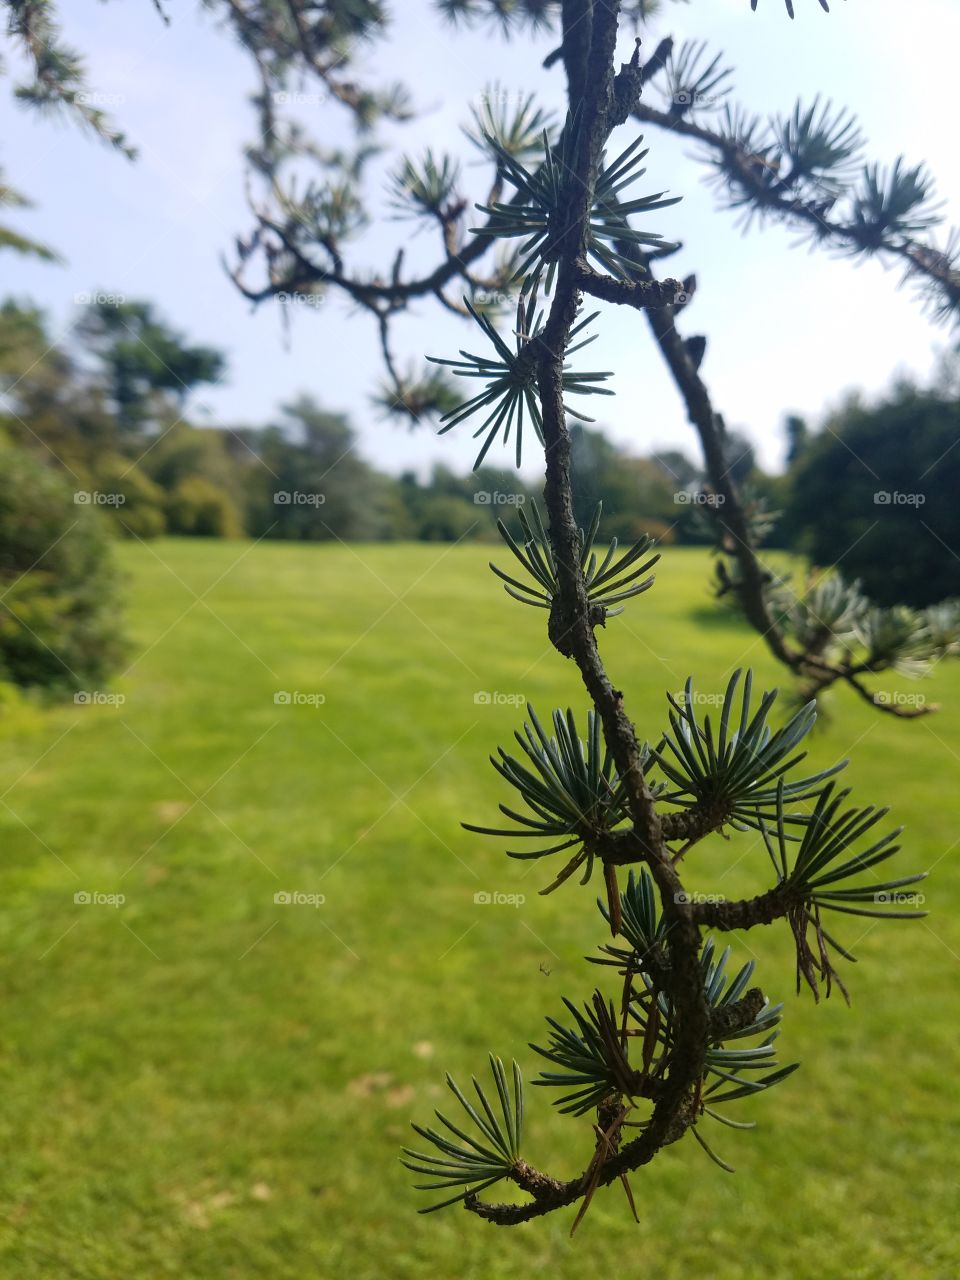 Planting Fields Arboretum State Park, Oyster Bay, NY - August 2017 - Taken on Android Phone - Galaxy S7 - Exploring the Grounds on a Lazy Sunday near the end of Summer